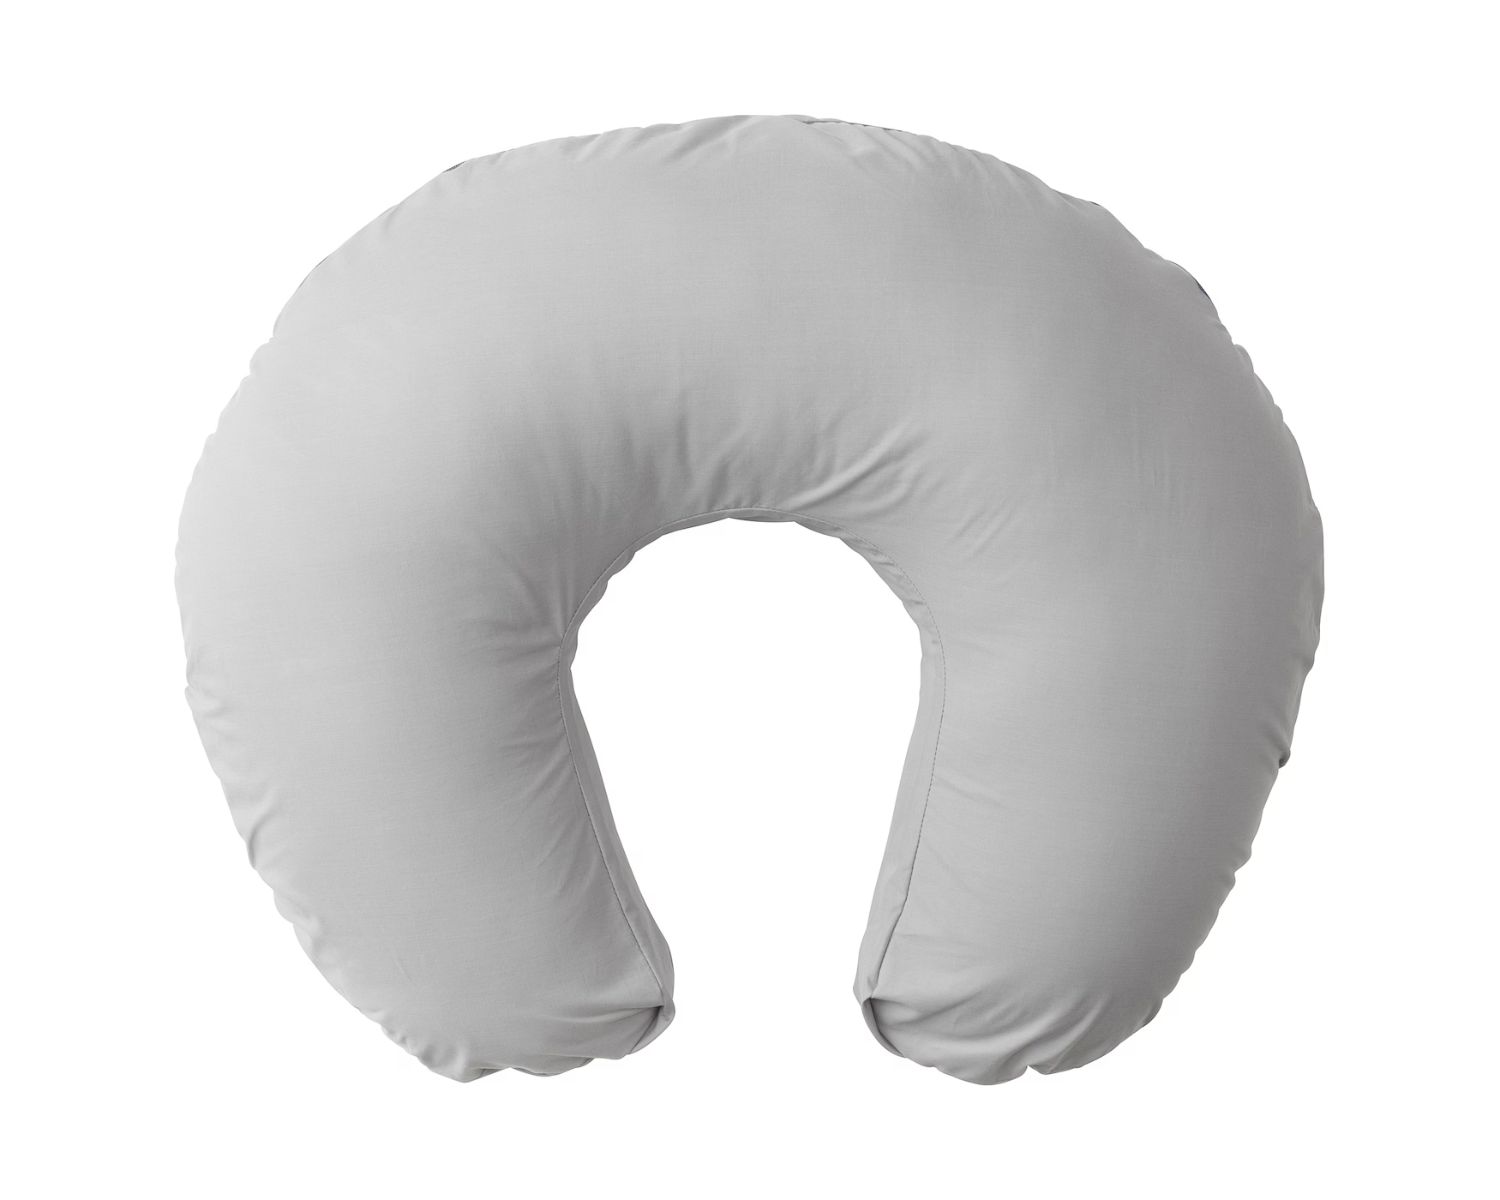 Nursing Pillow Cover Review: A Must-Have for New Moms